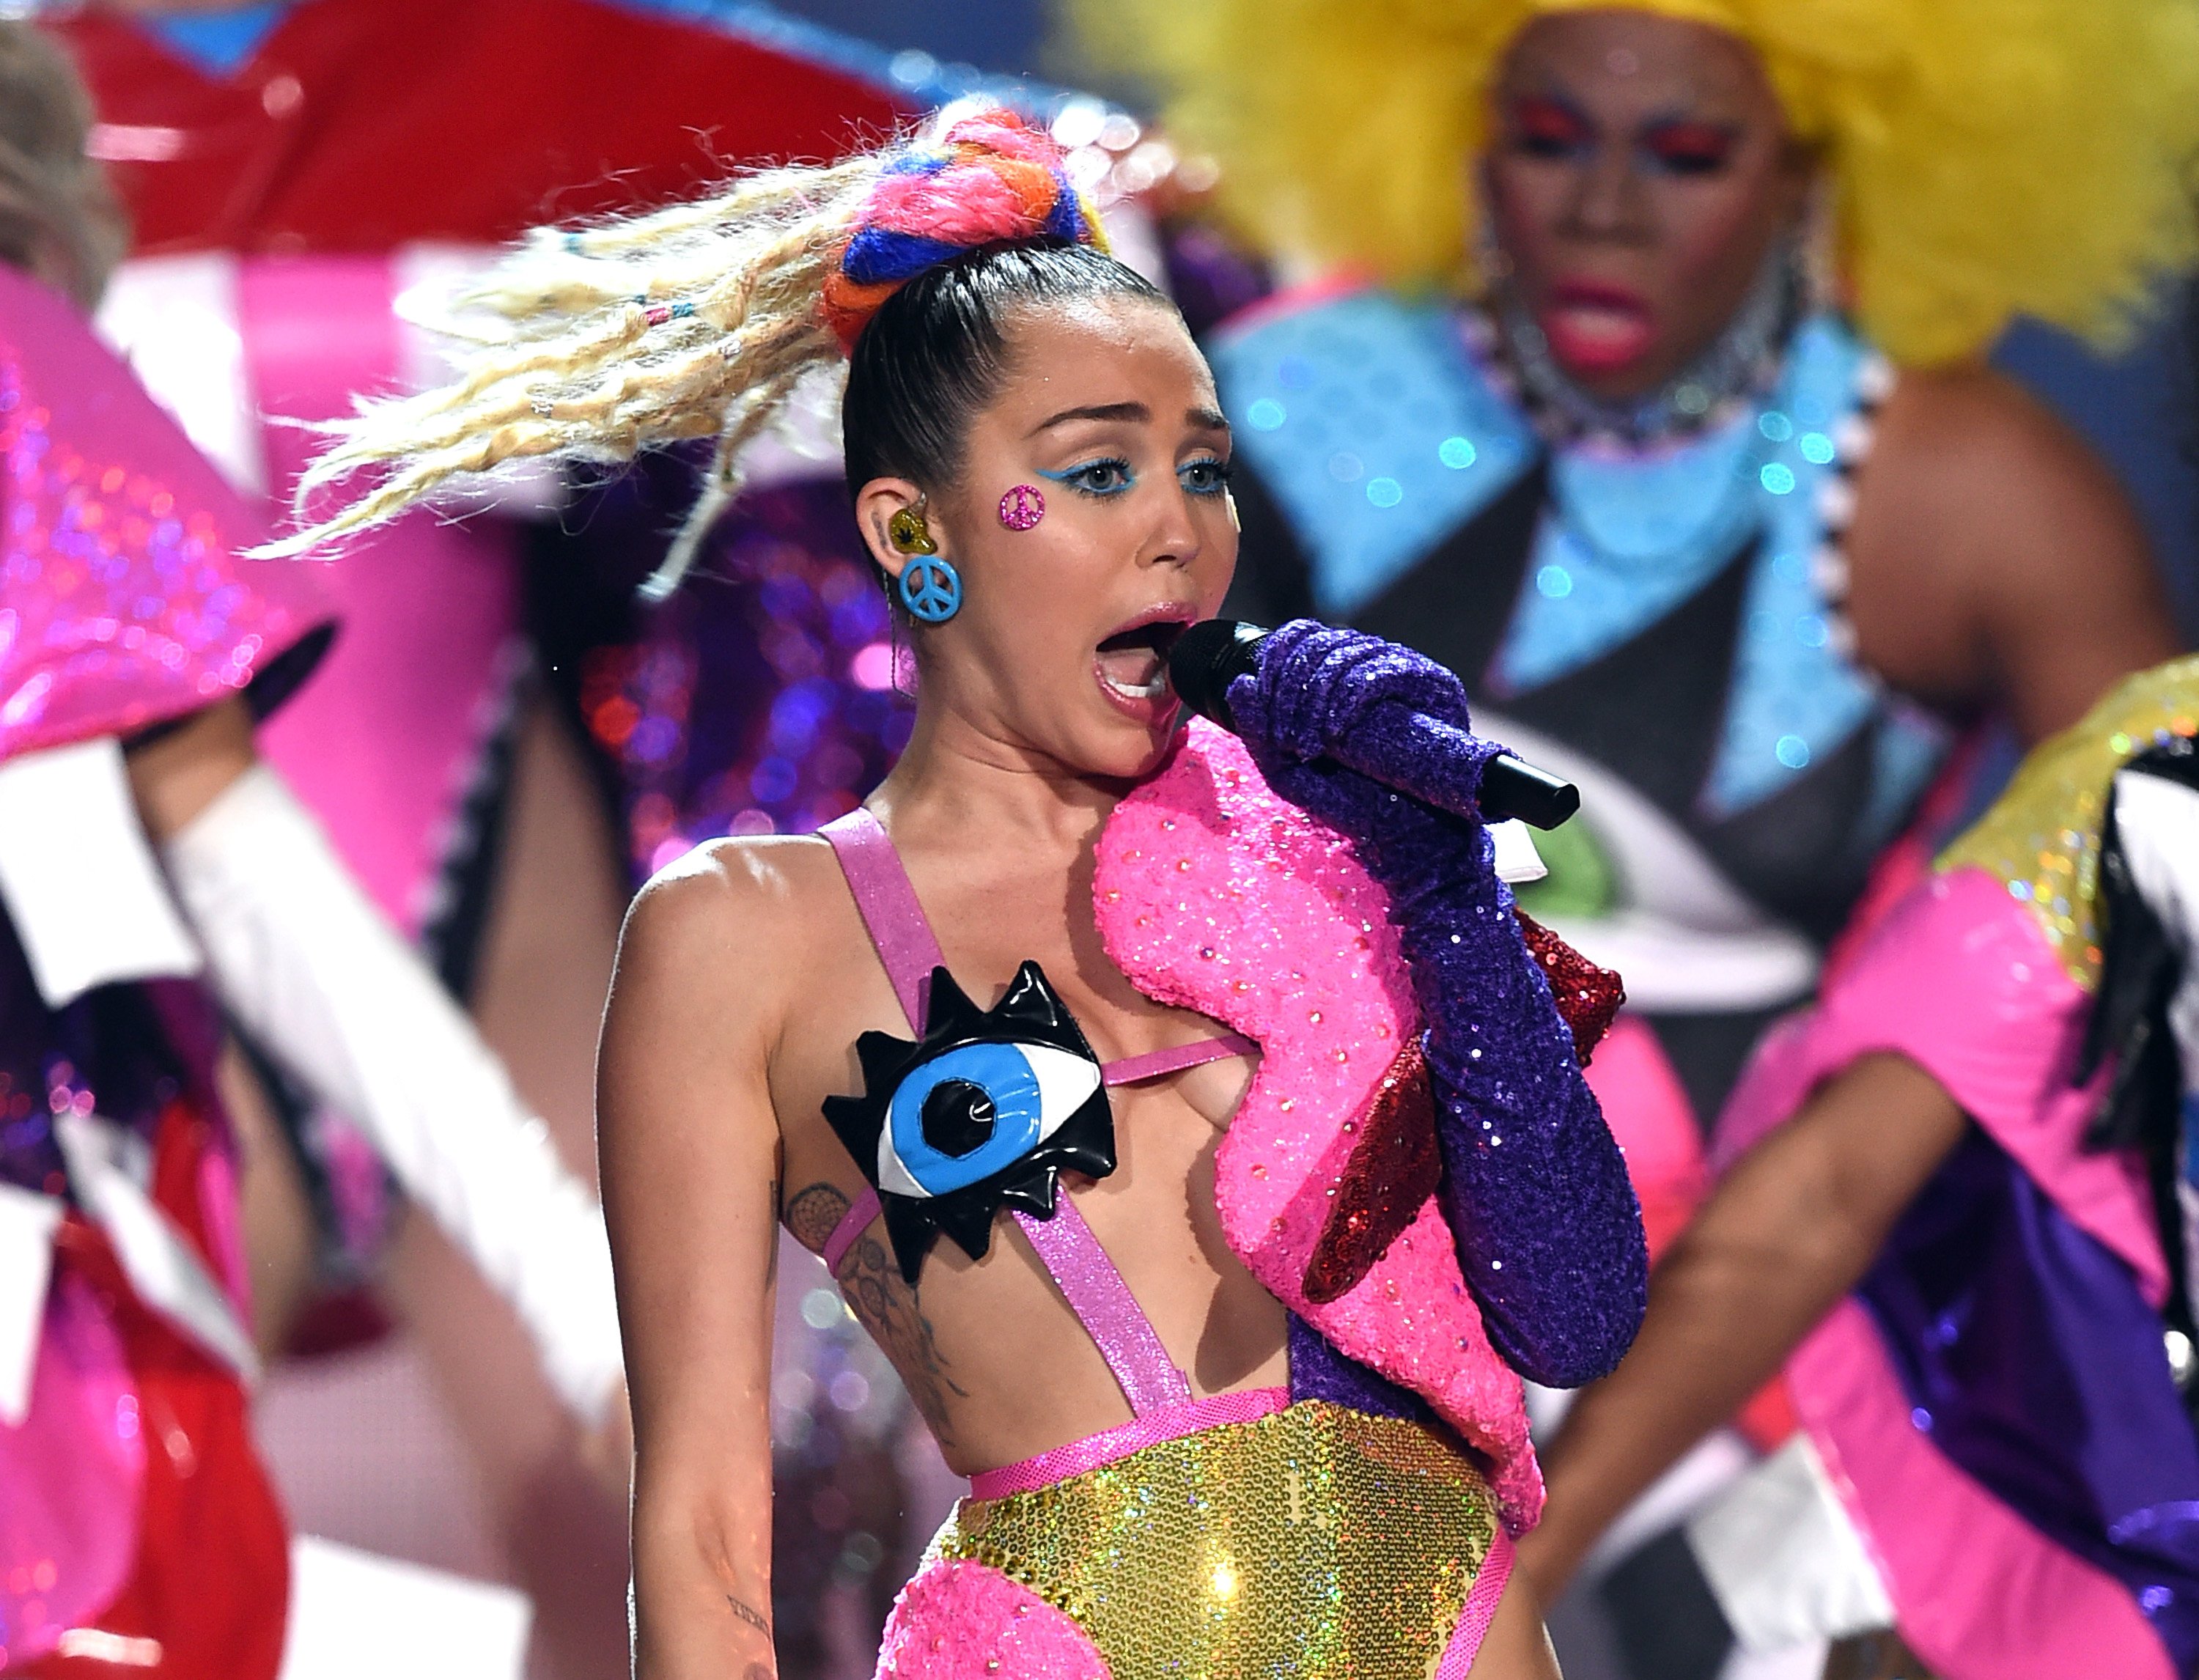 Miley Cyrus performs onstage during the 2015 MTV Video Music Awards on August 30, 2015 in Los Angeles, California.